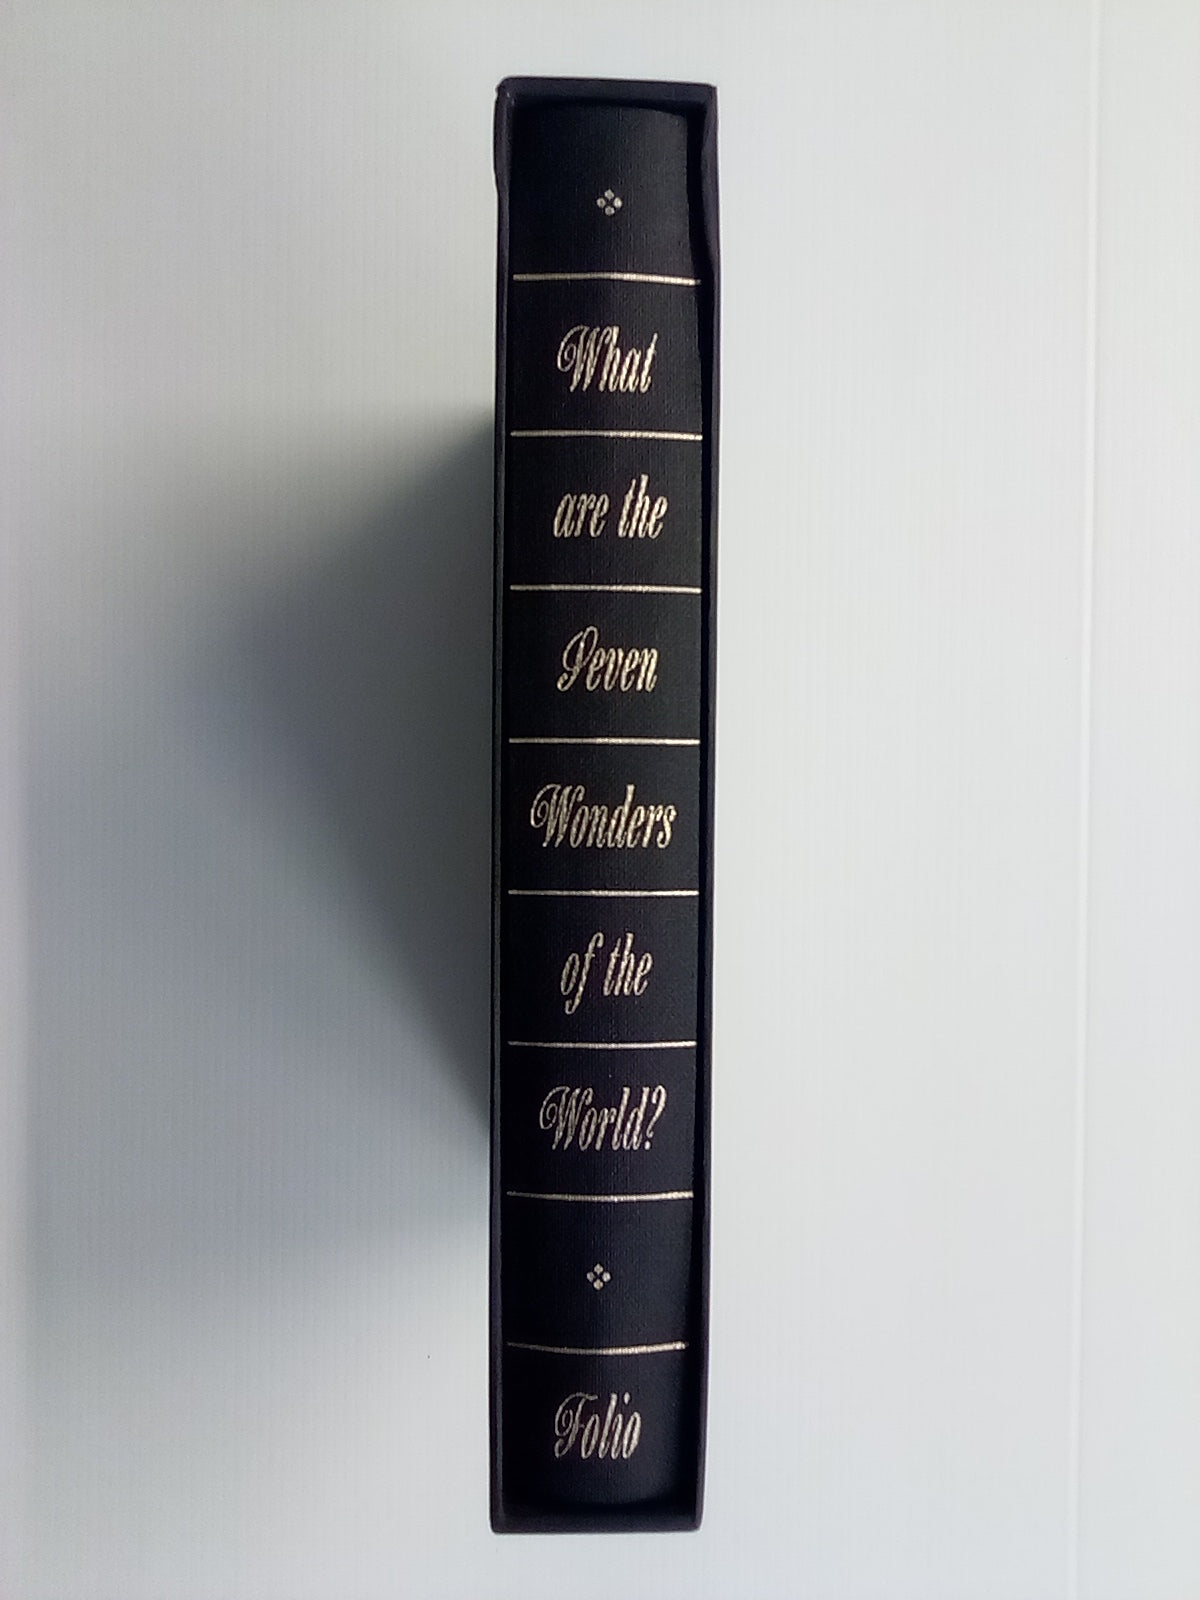 Folio Society - What are the Seven Wonders of the World?